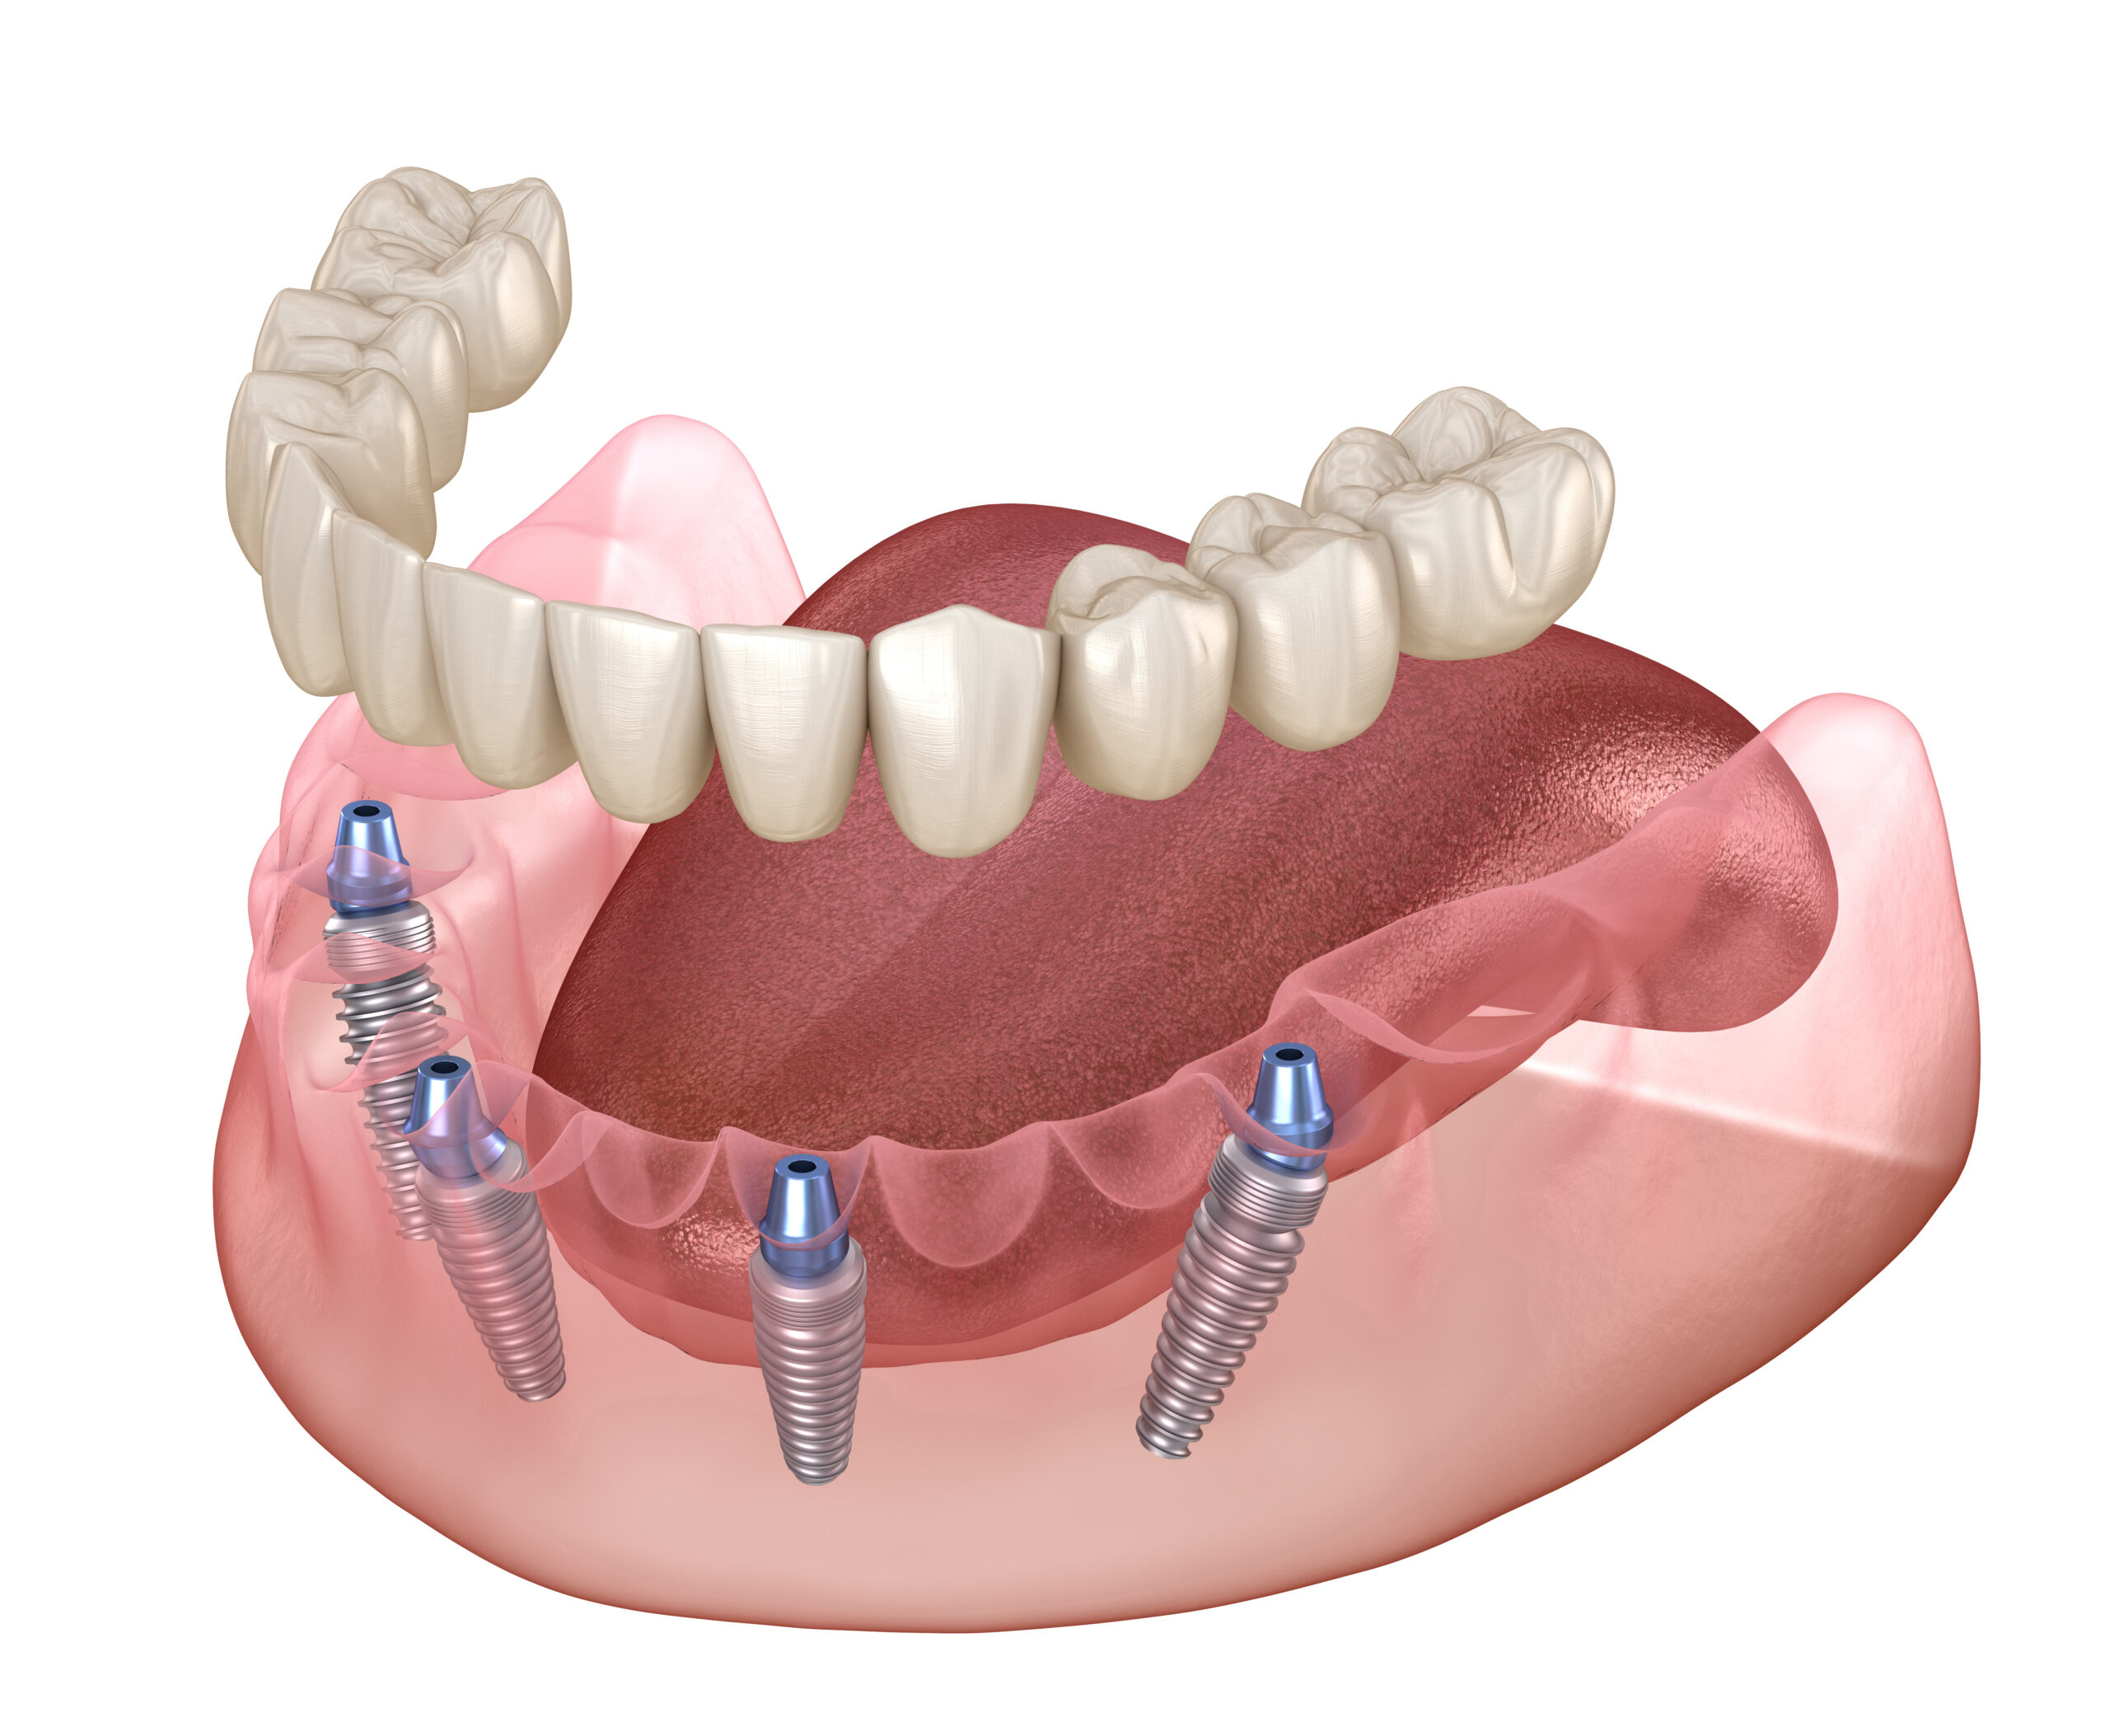 Mandibular prosthesis All on 4 system supported by implants. Medically accurate 3D illustration of human teeth and dentures concept.